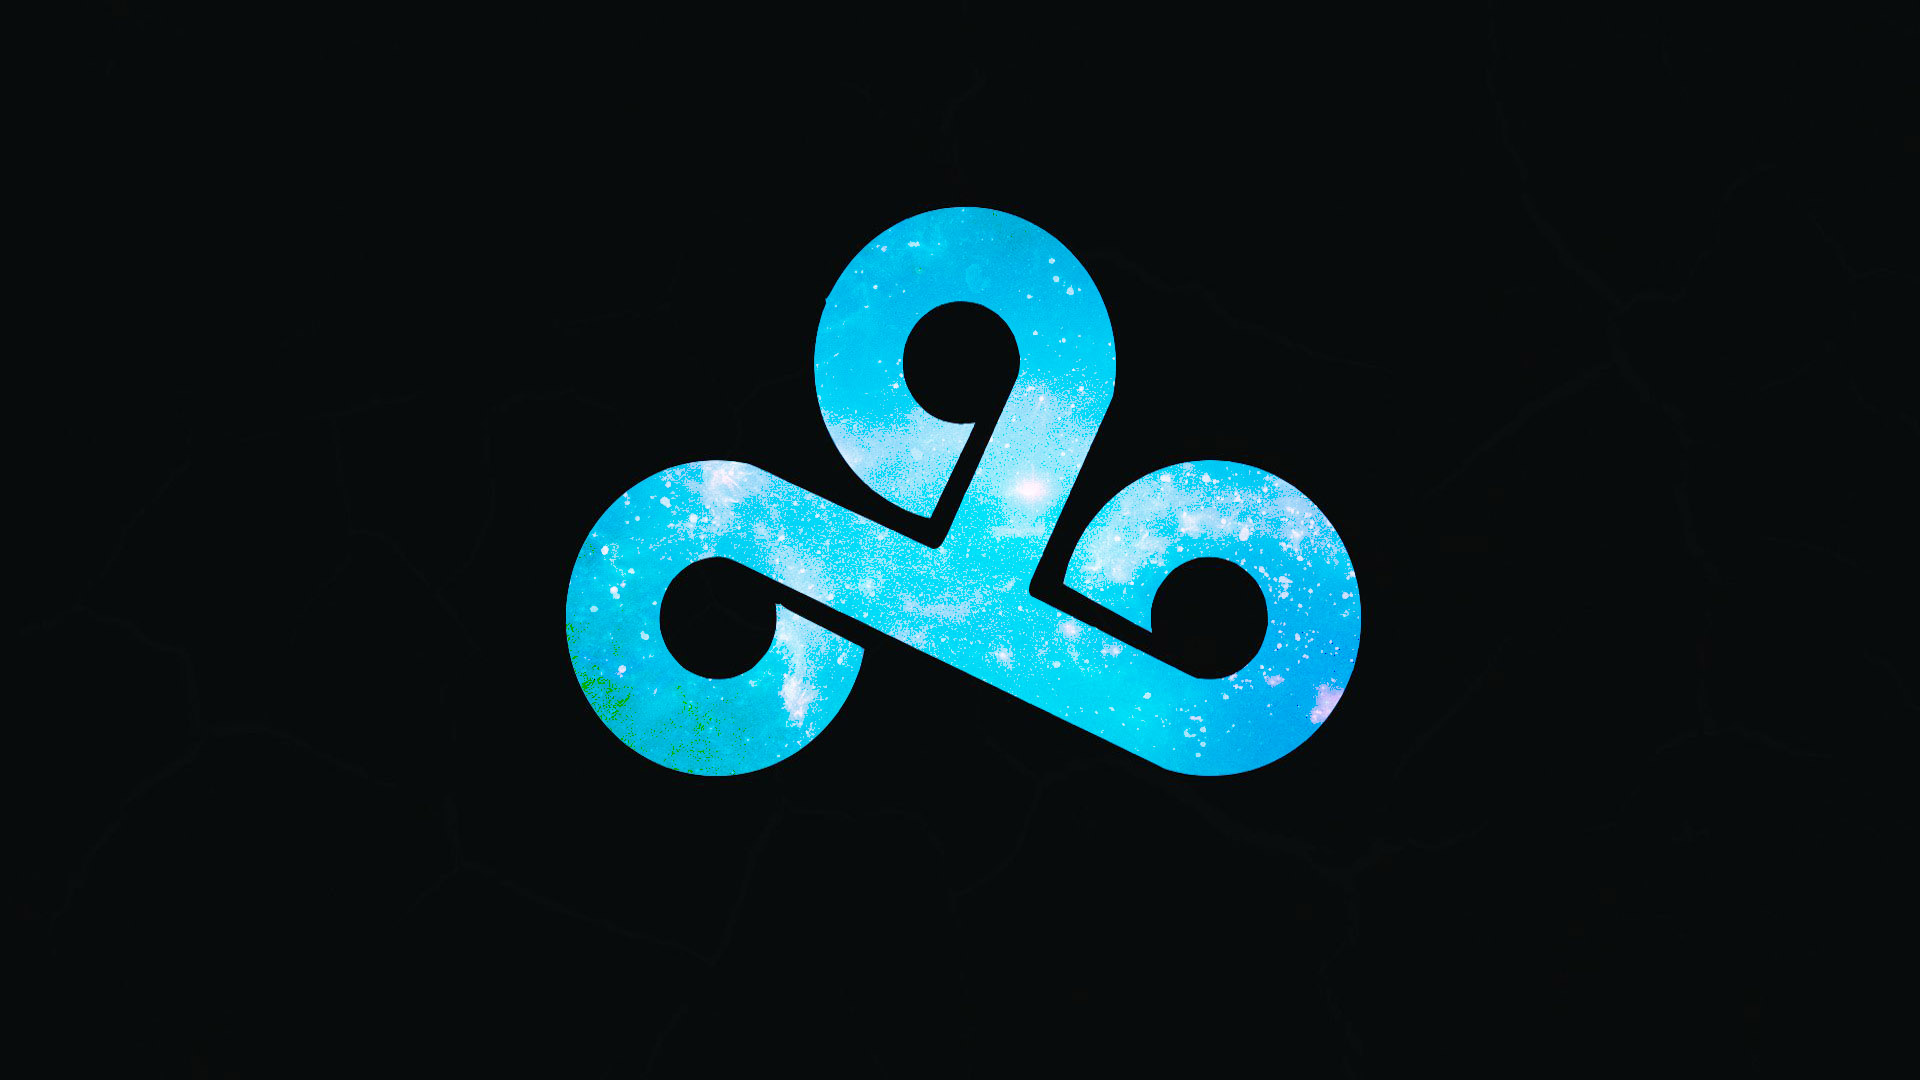 Made This C9 Wallpaper Earlier First Time Photoshop User So Feel